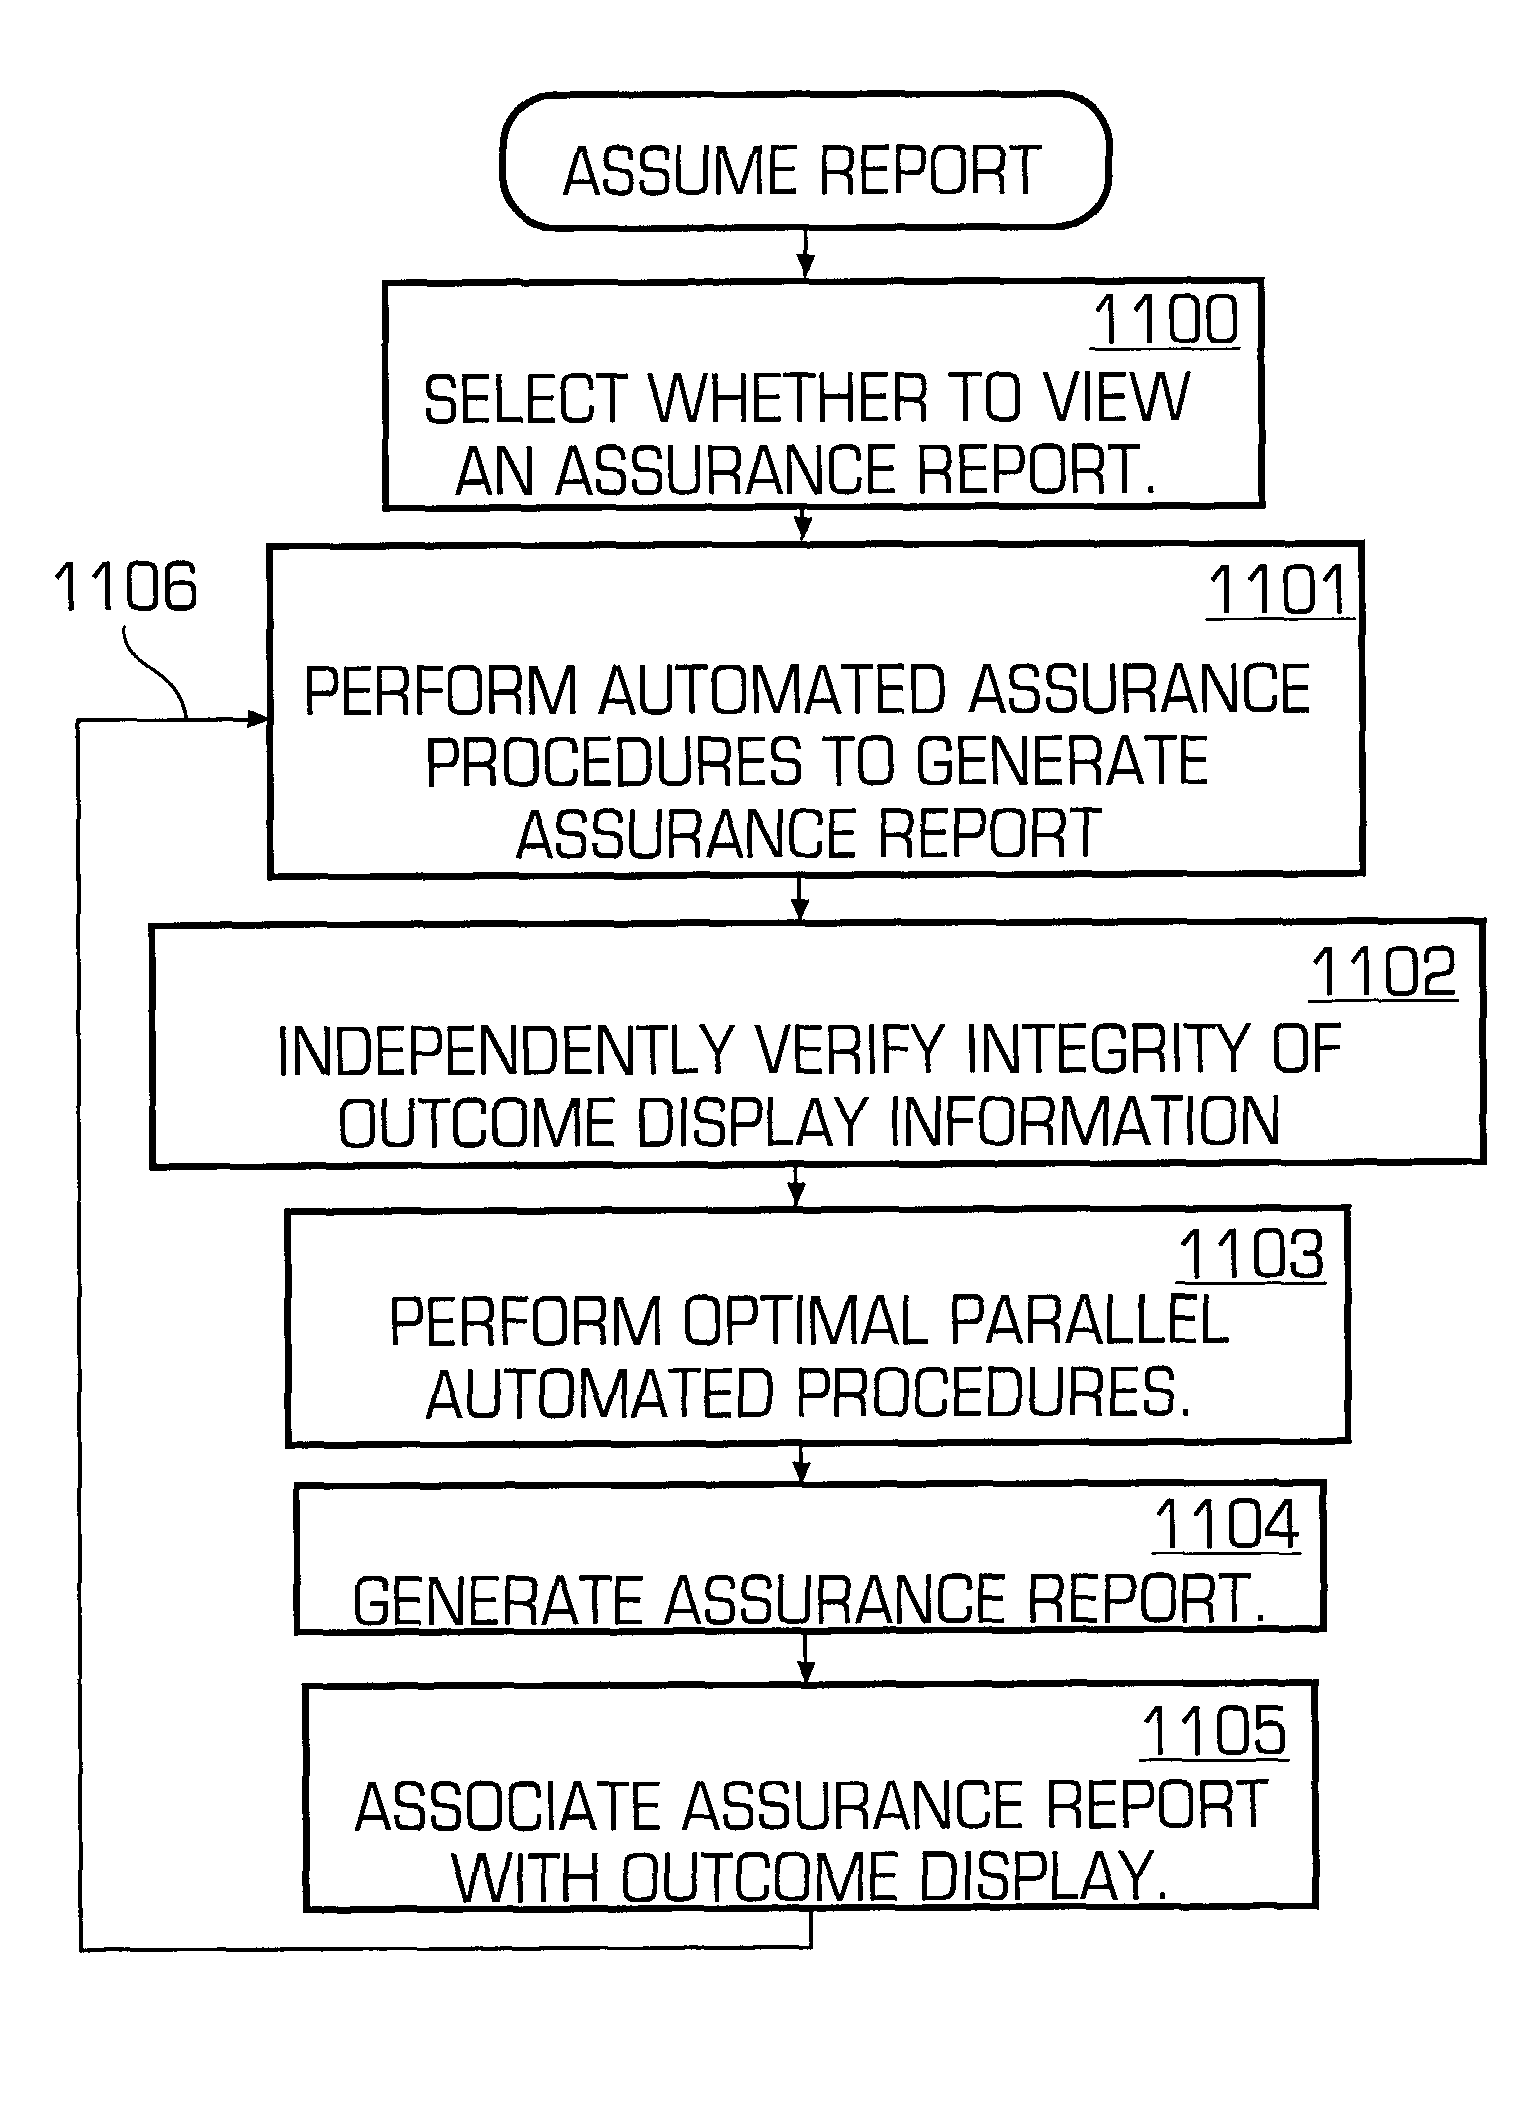 Data processing system for analysis of financial and non-financial value creation and value realization performance of a business enterprise for provisioning of real-time assurance reports